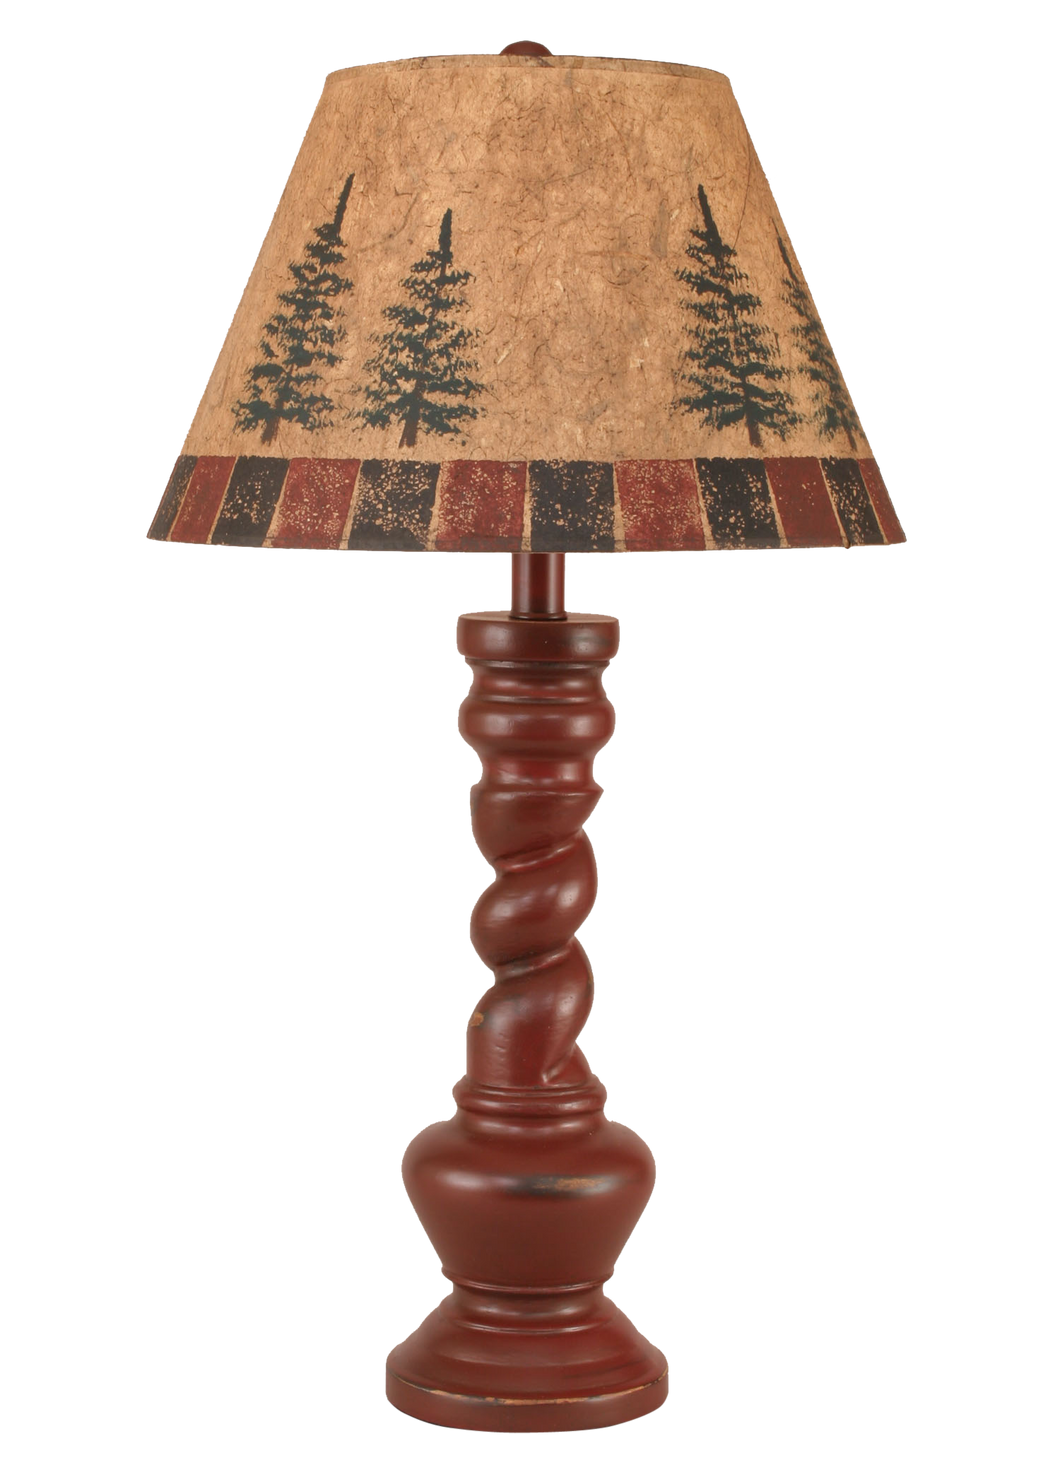 Distressed Red Country Twist Table Lamp w/ Pine Tree Shade